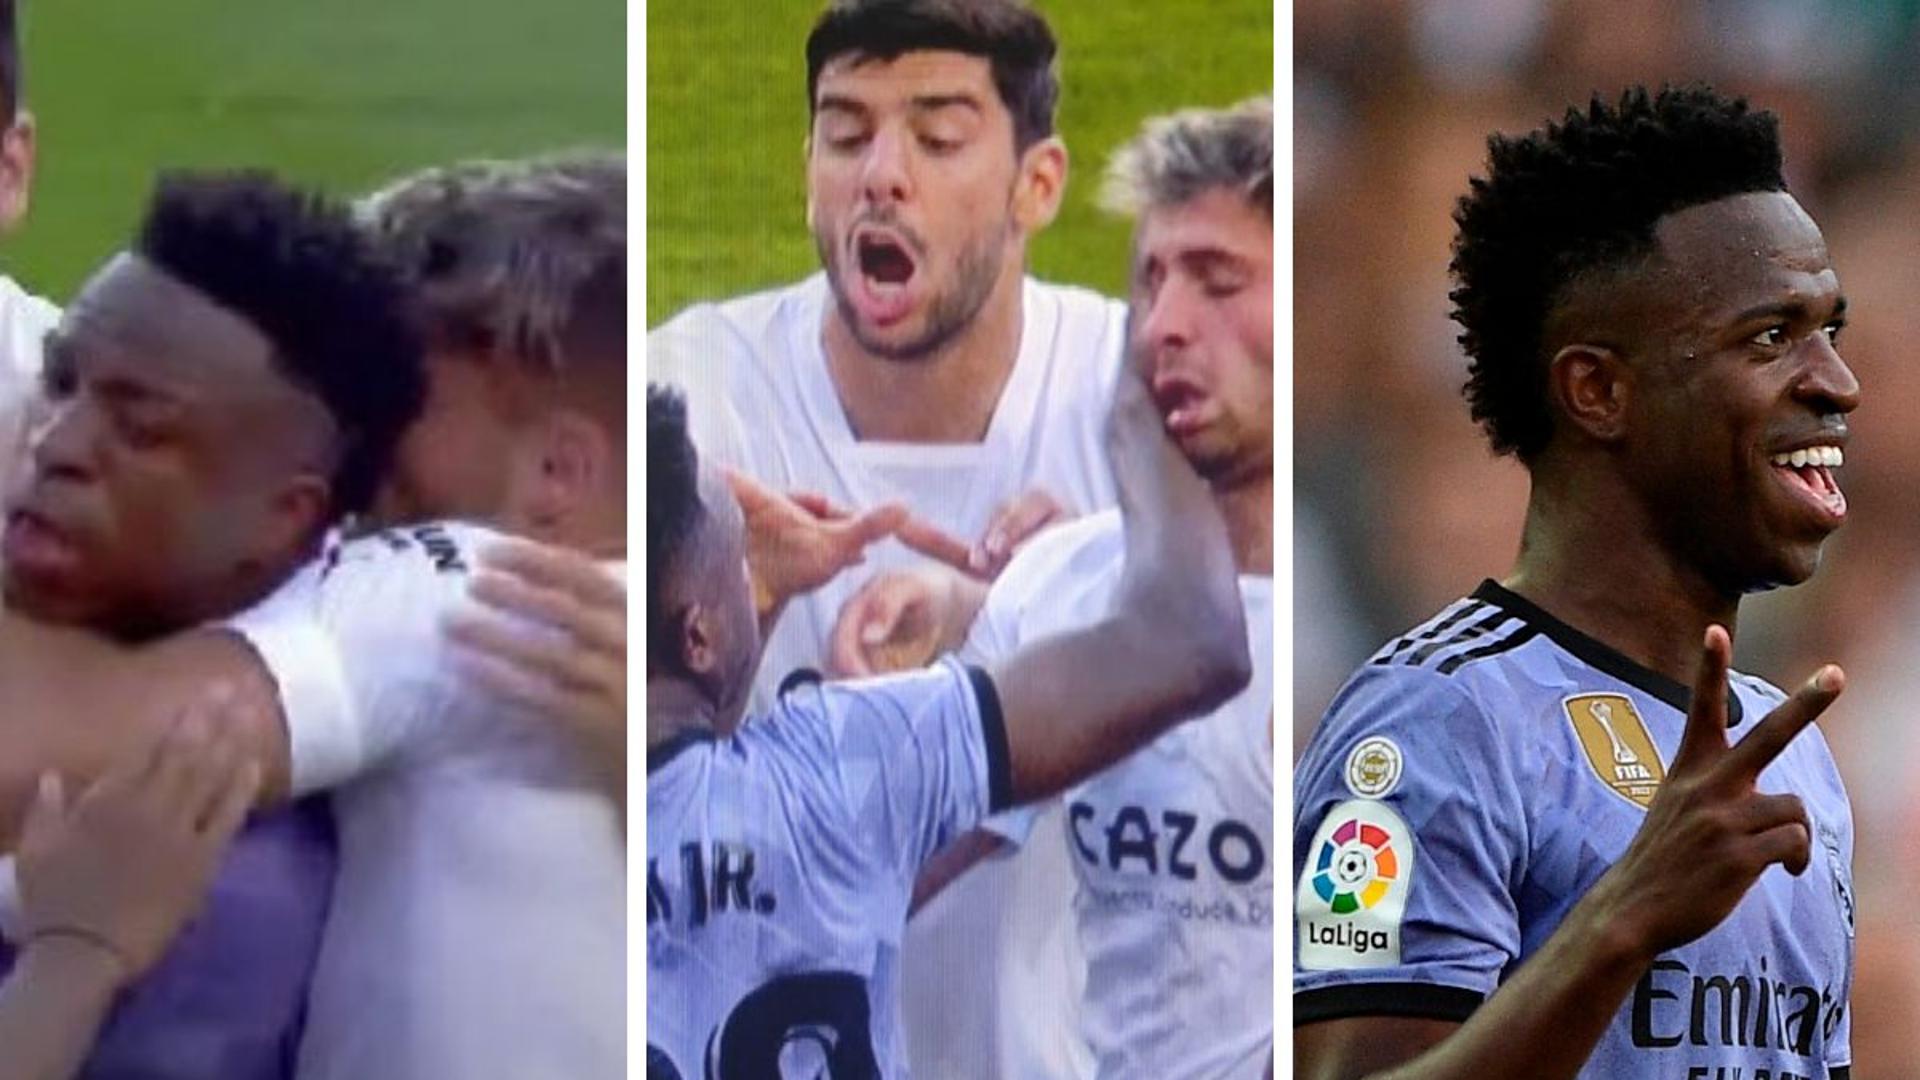 Vinicius explodes against Thebes after the racist episode in Mestalla: “I’m not your friend”